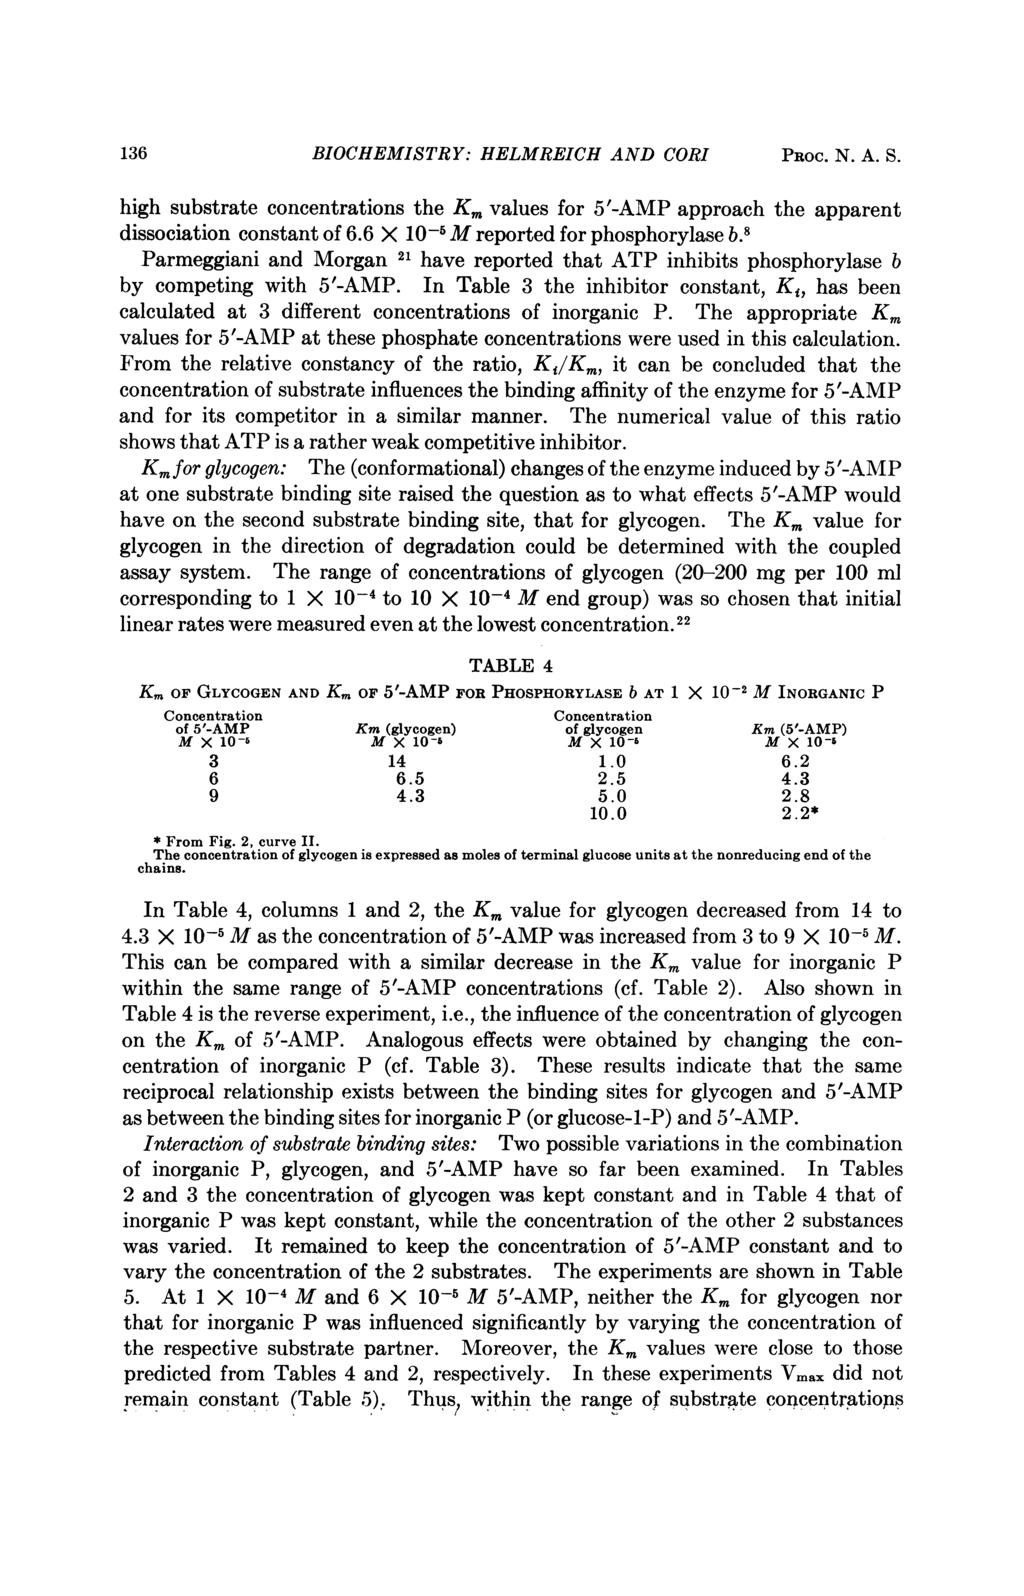 136 BIOCHEMISTRY: HELMREICH AND CORI PROC. N. A. S. high substrate concentrations the Km values for 5'-AMP approach the apparent dissociation constant of 6.6 X 10-5 M reported for phosphorylase b.